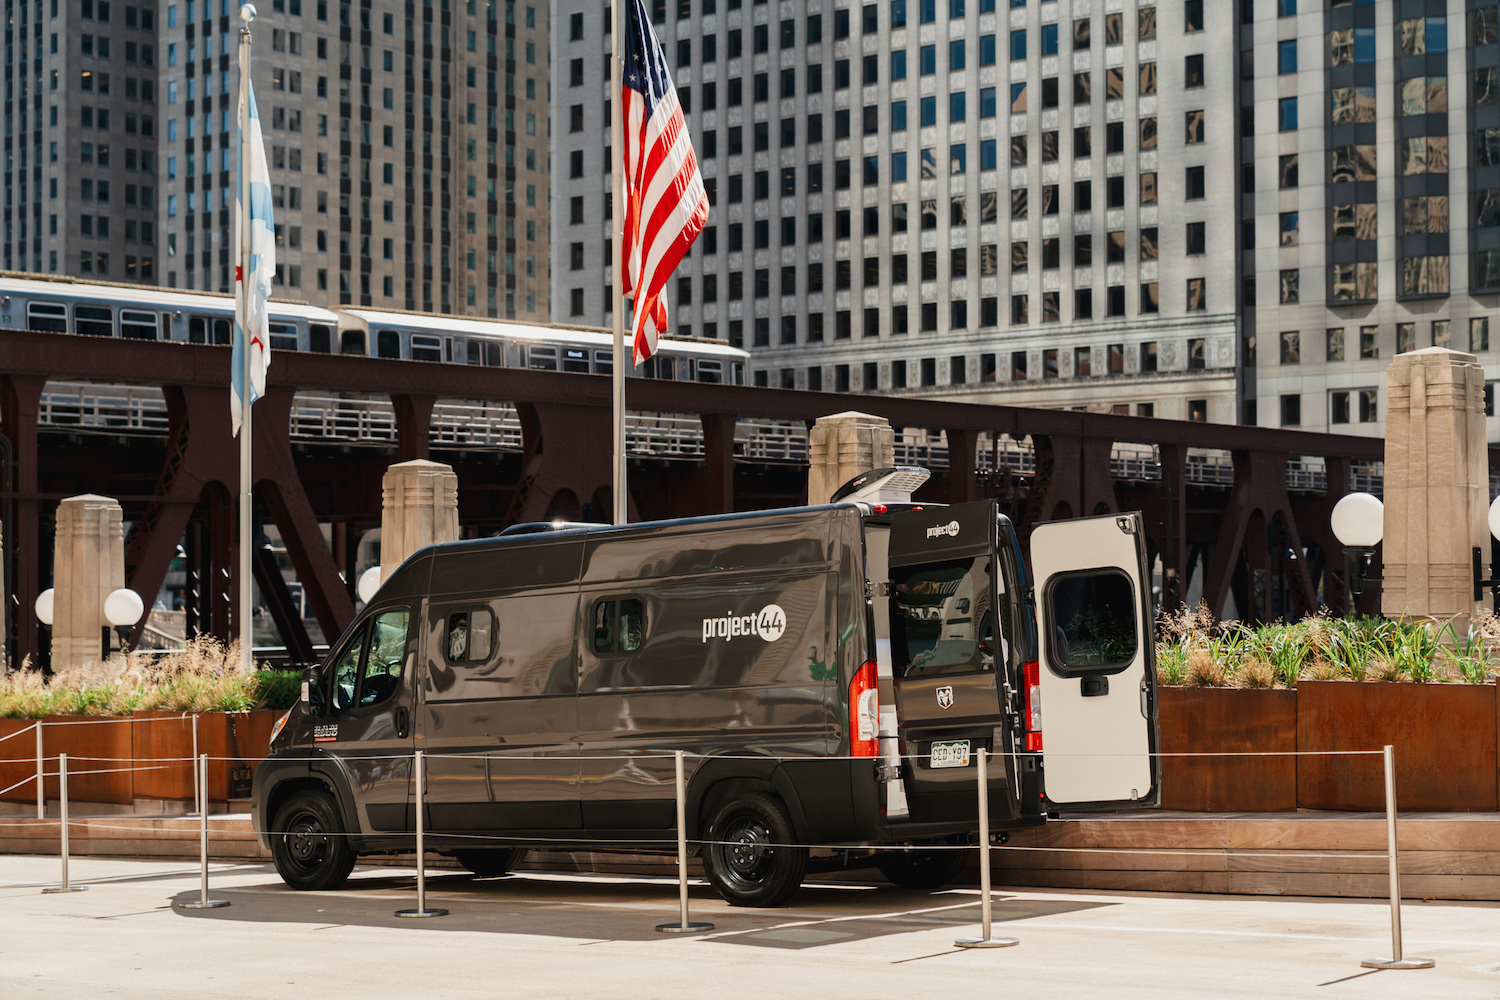 One of project44’s vans is pictured in front of Merchandise Mart in Chicago.